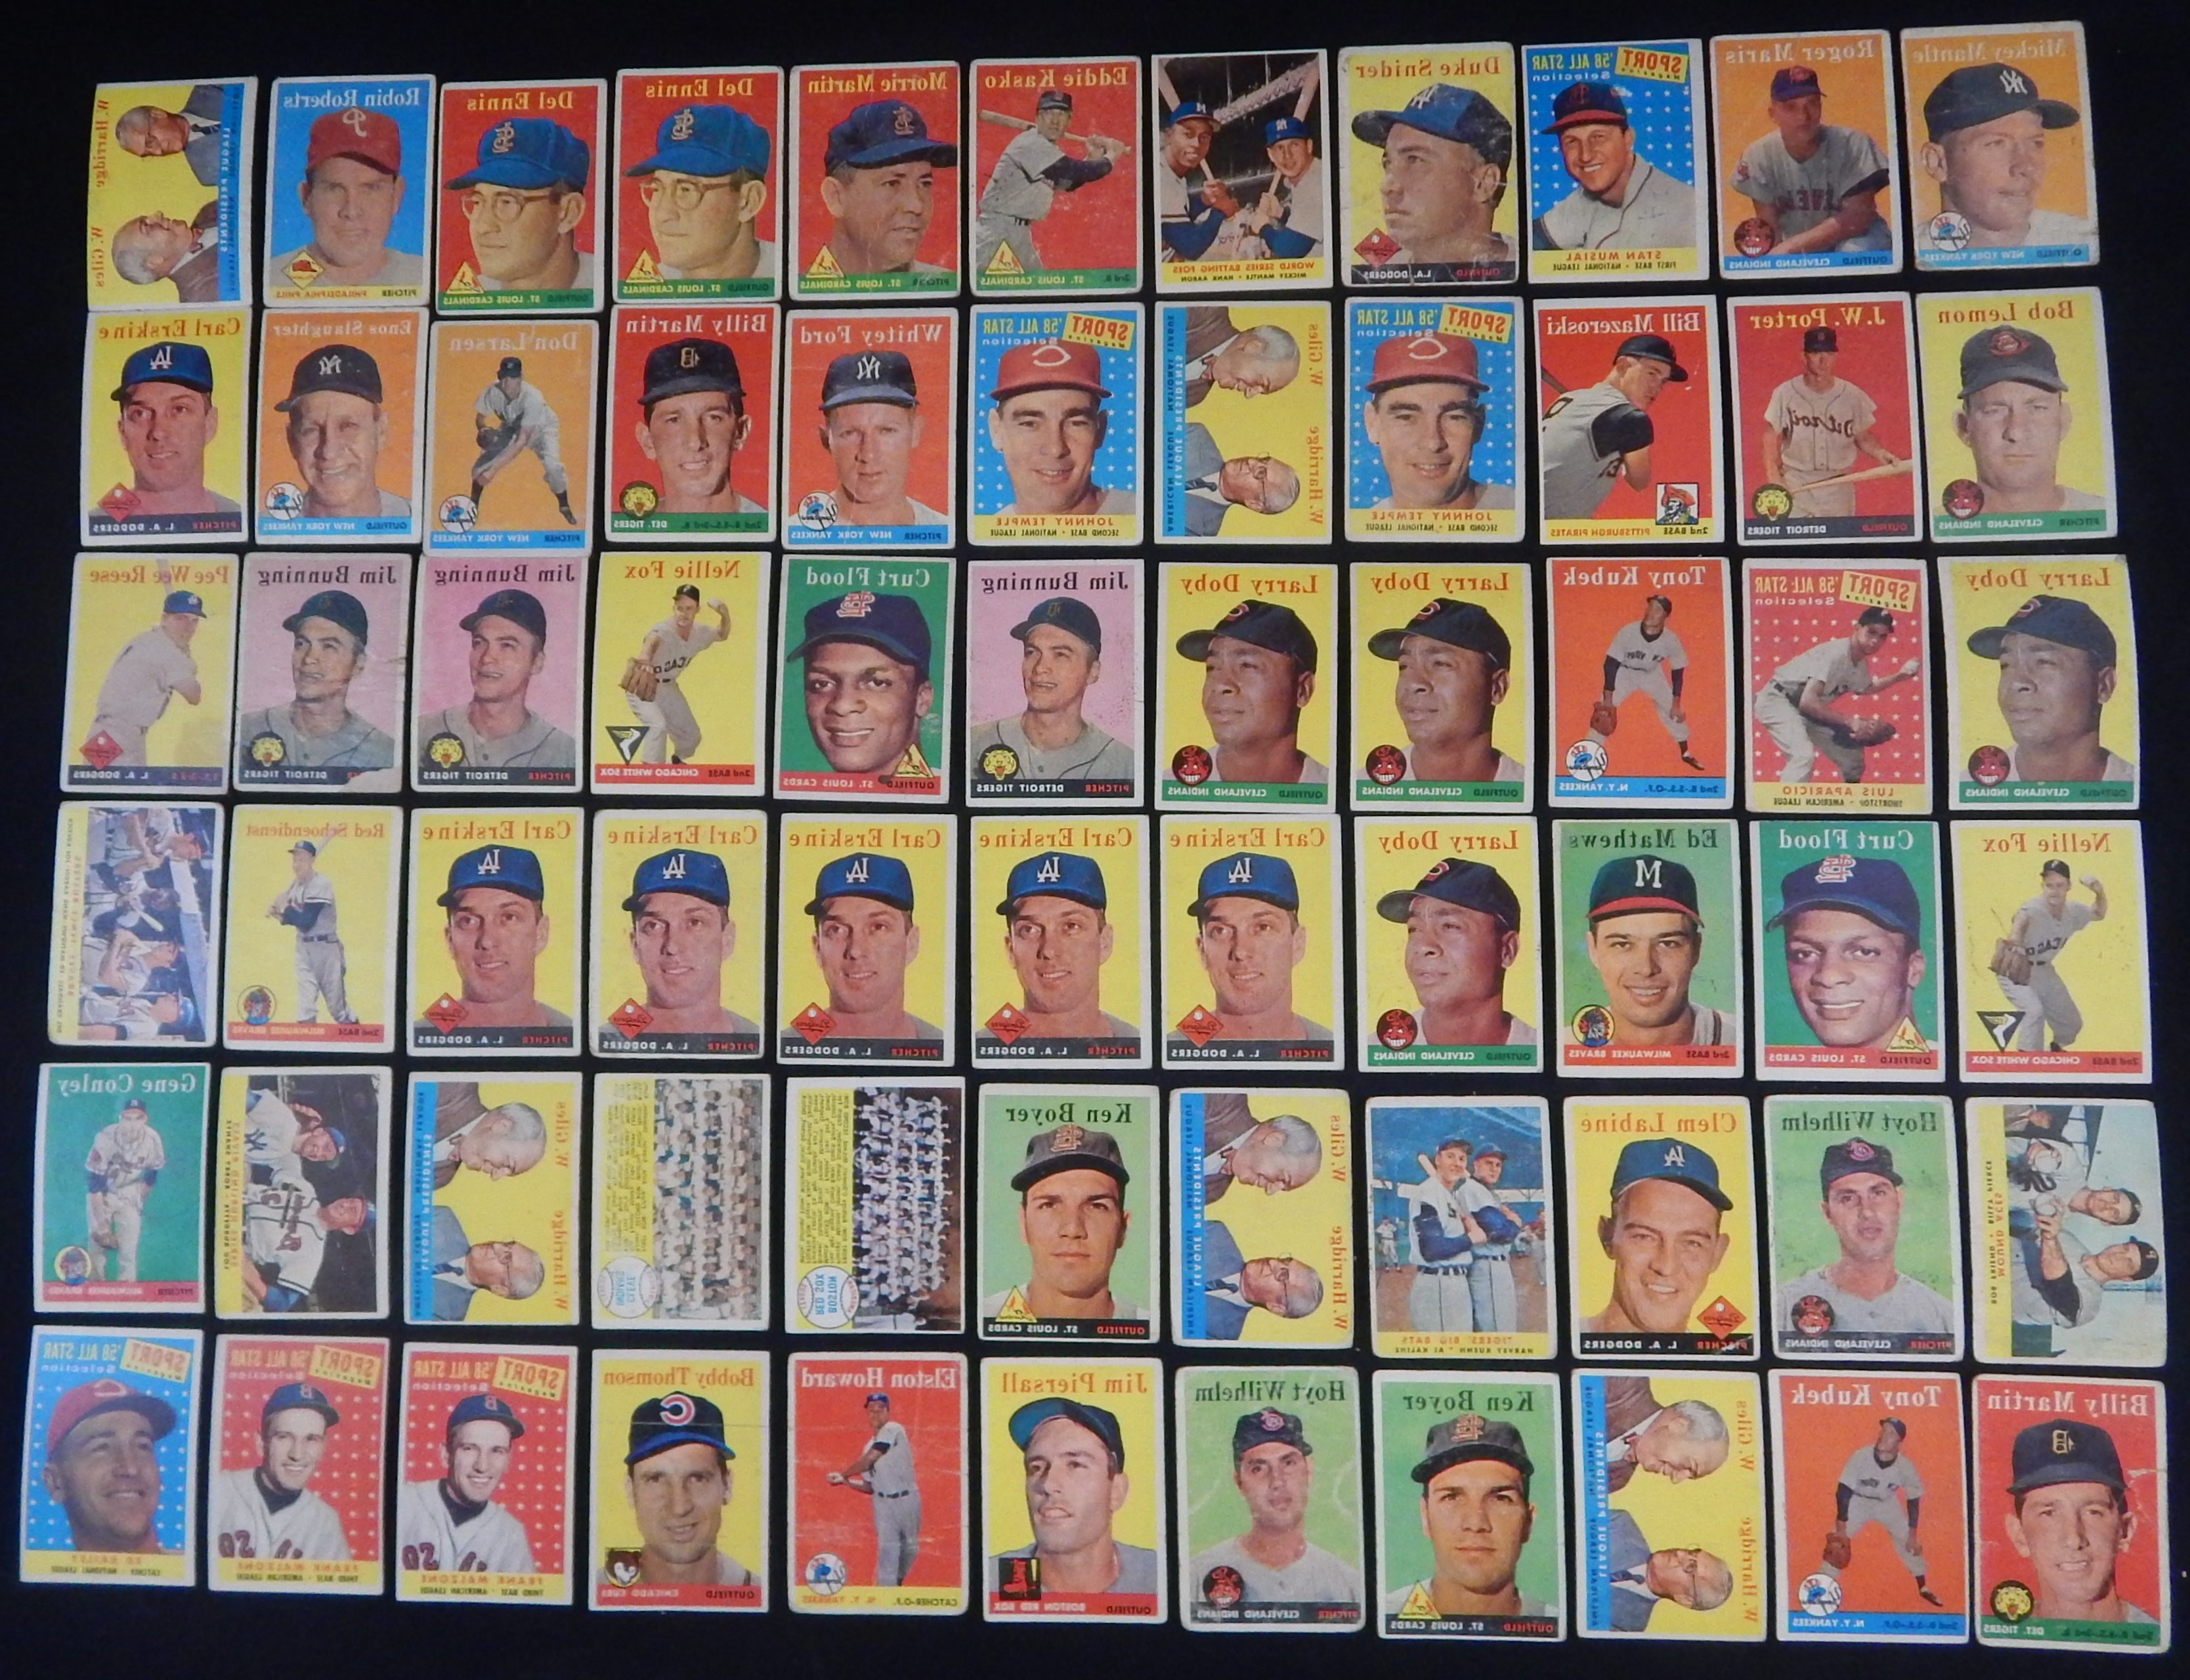 1958 Topps Collection of 2,000+ Cards with Mantle and Maris